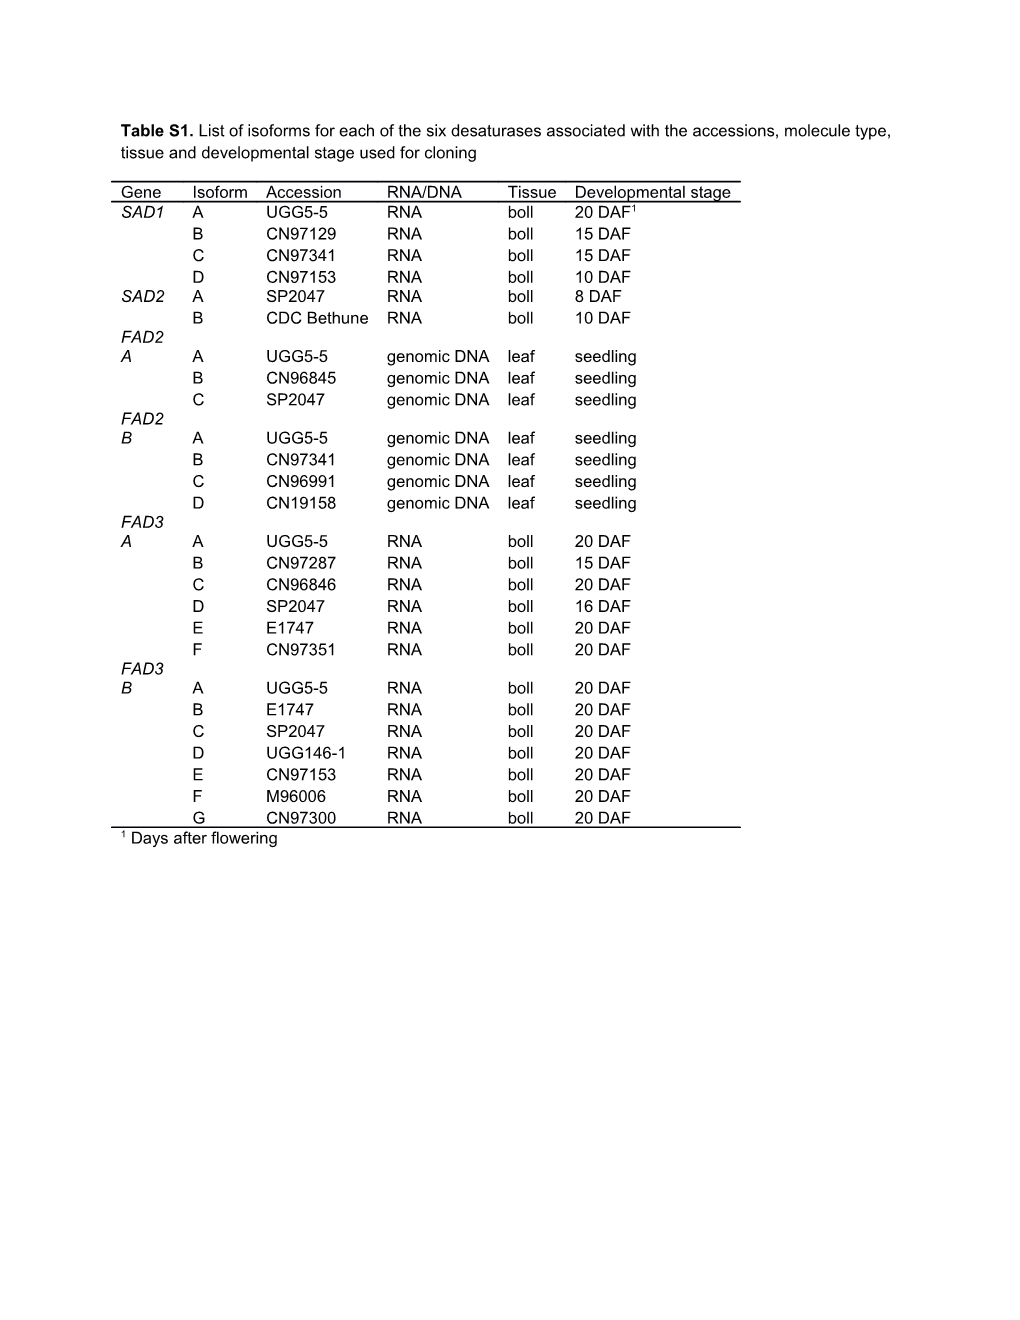 Table S1. List of Isoforms for Each of the Six Desaturases Associated with the Accessions